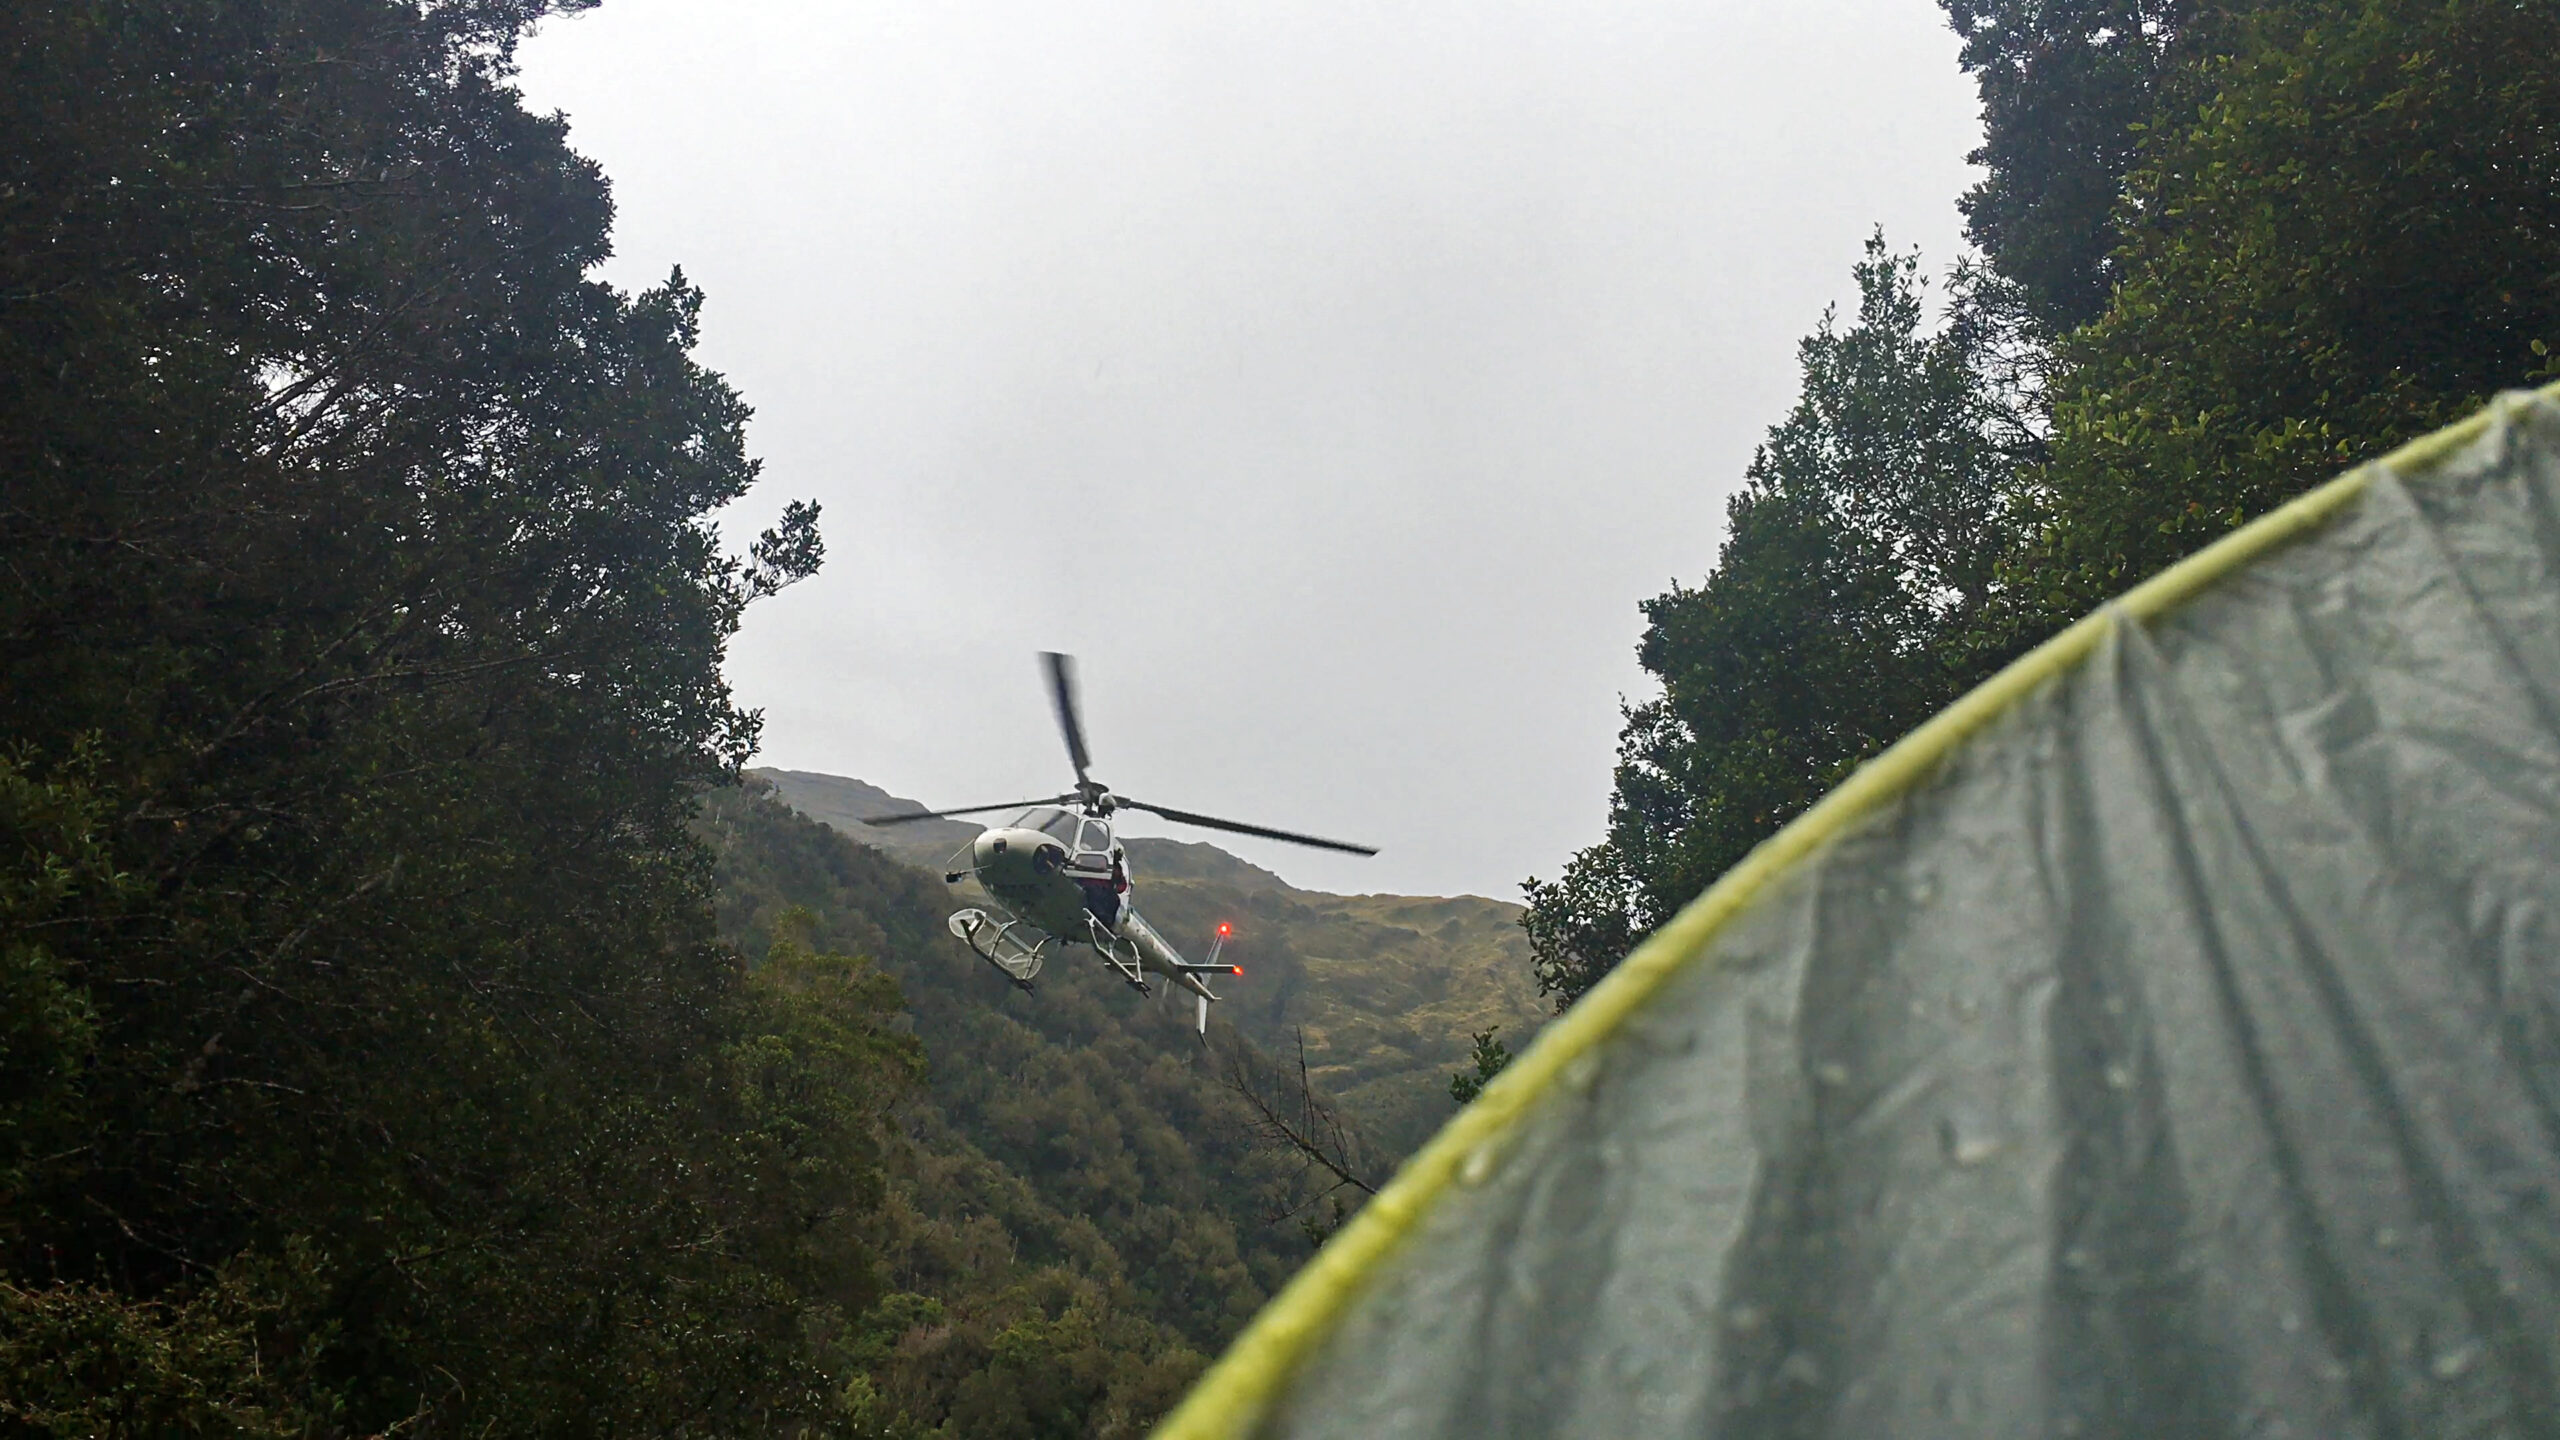 A rescue helicopter hovers above a ravine on the Toaroha Track on New Zealand's South Island.